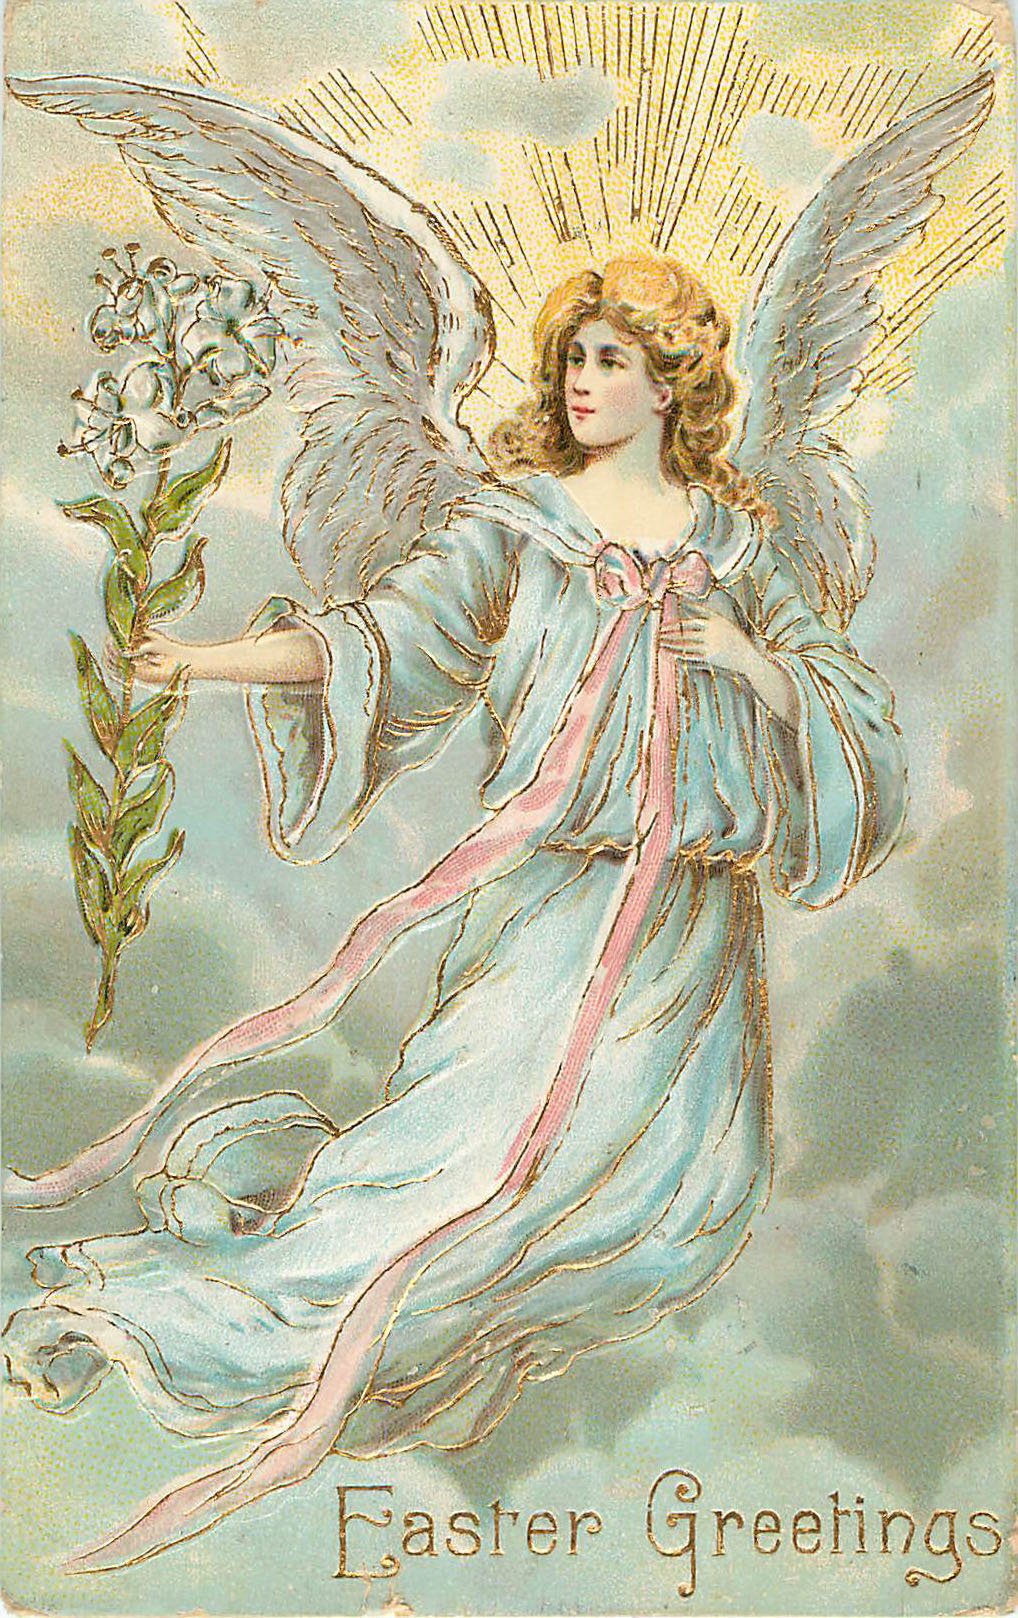 Easter Greetings - Angel with sunrays and flowers